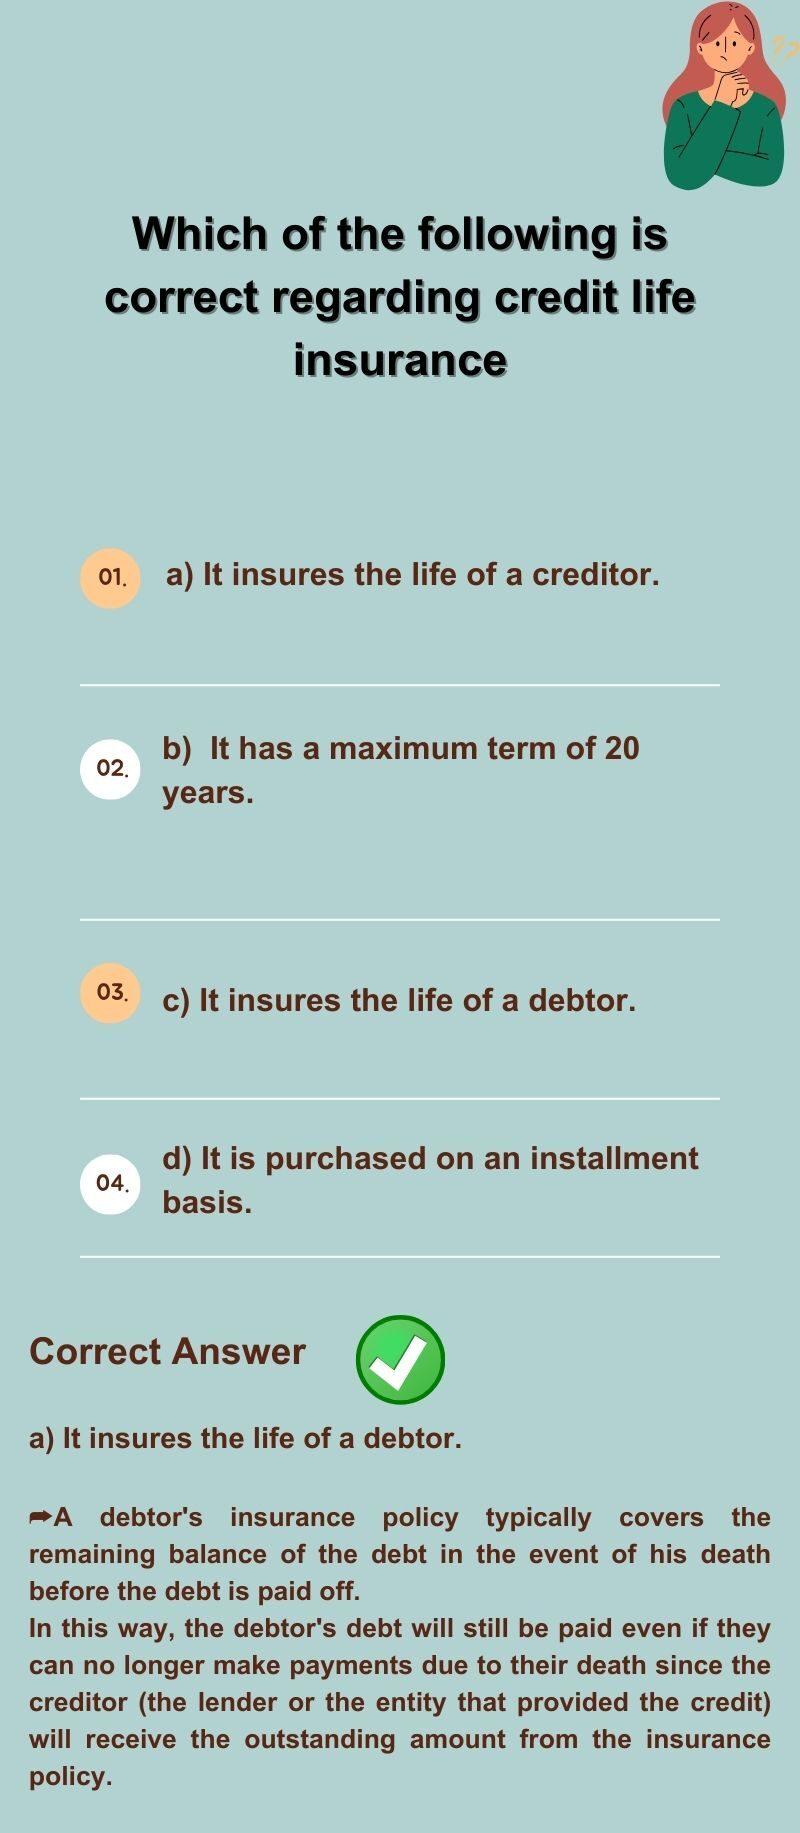 Which of the following is correct regarding credit life insurance